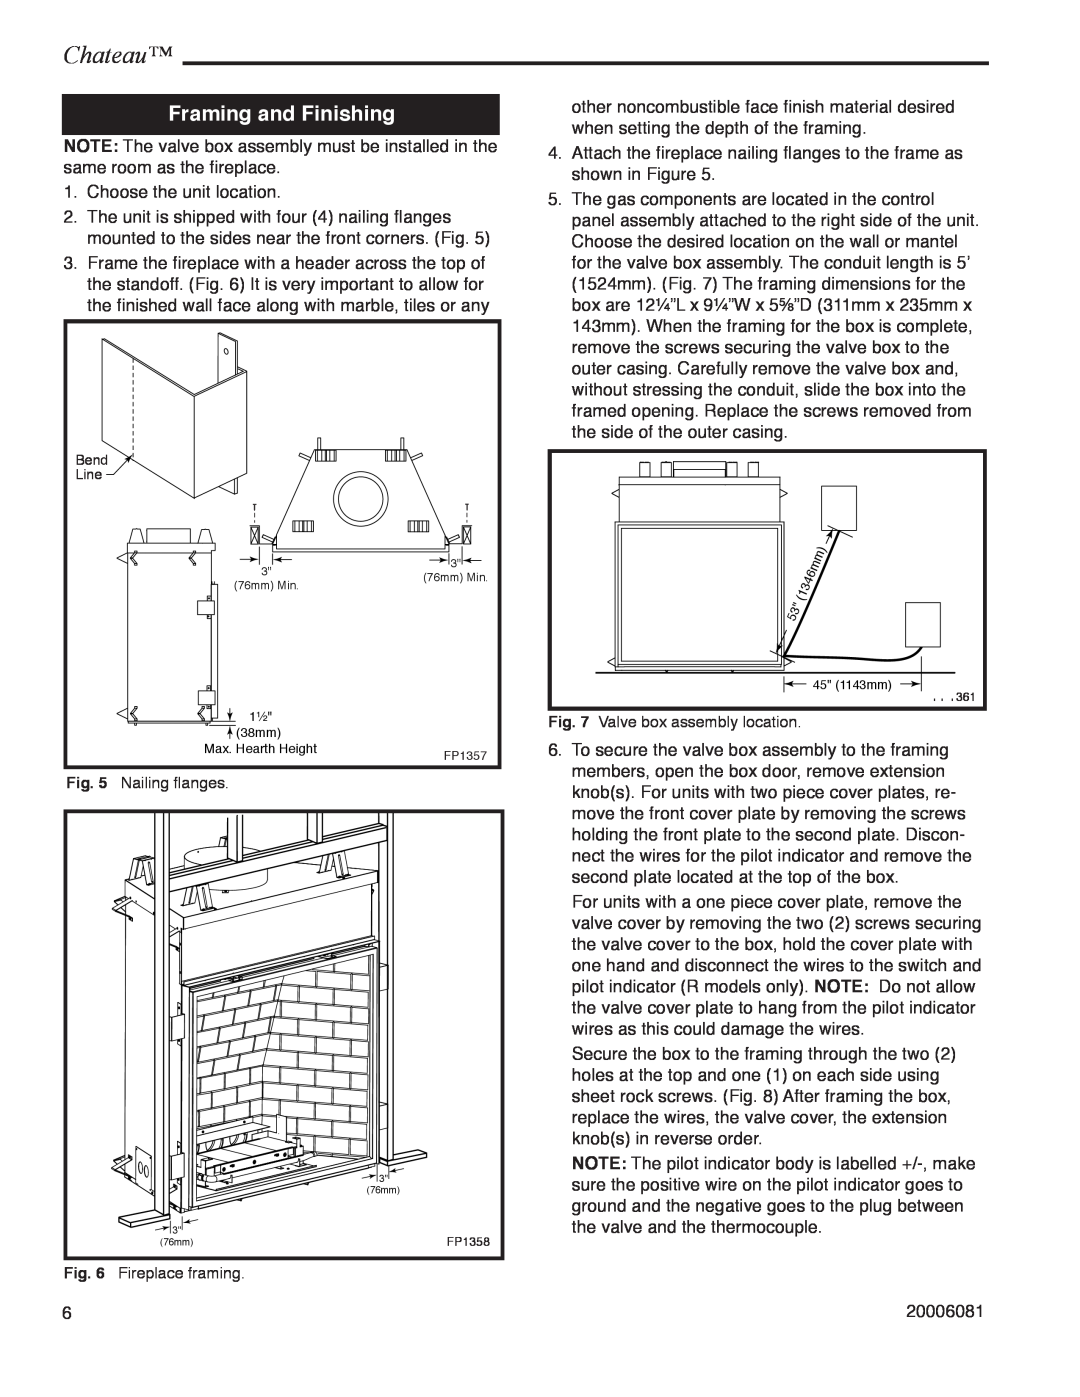 Vermont Casting DVT38 installation instructions Framing and Finishing, Chateau 